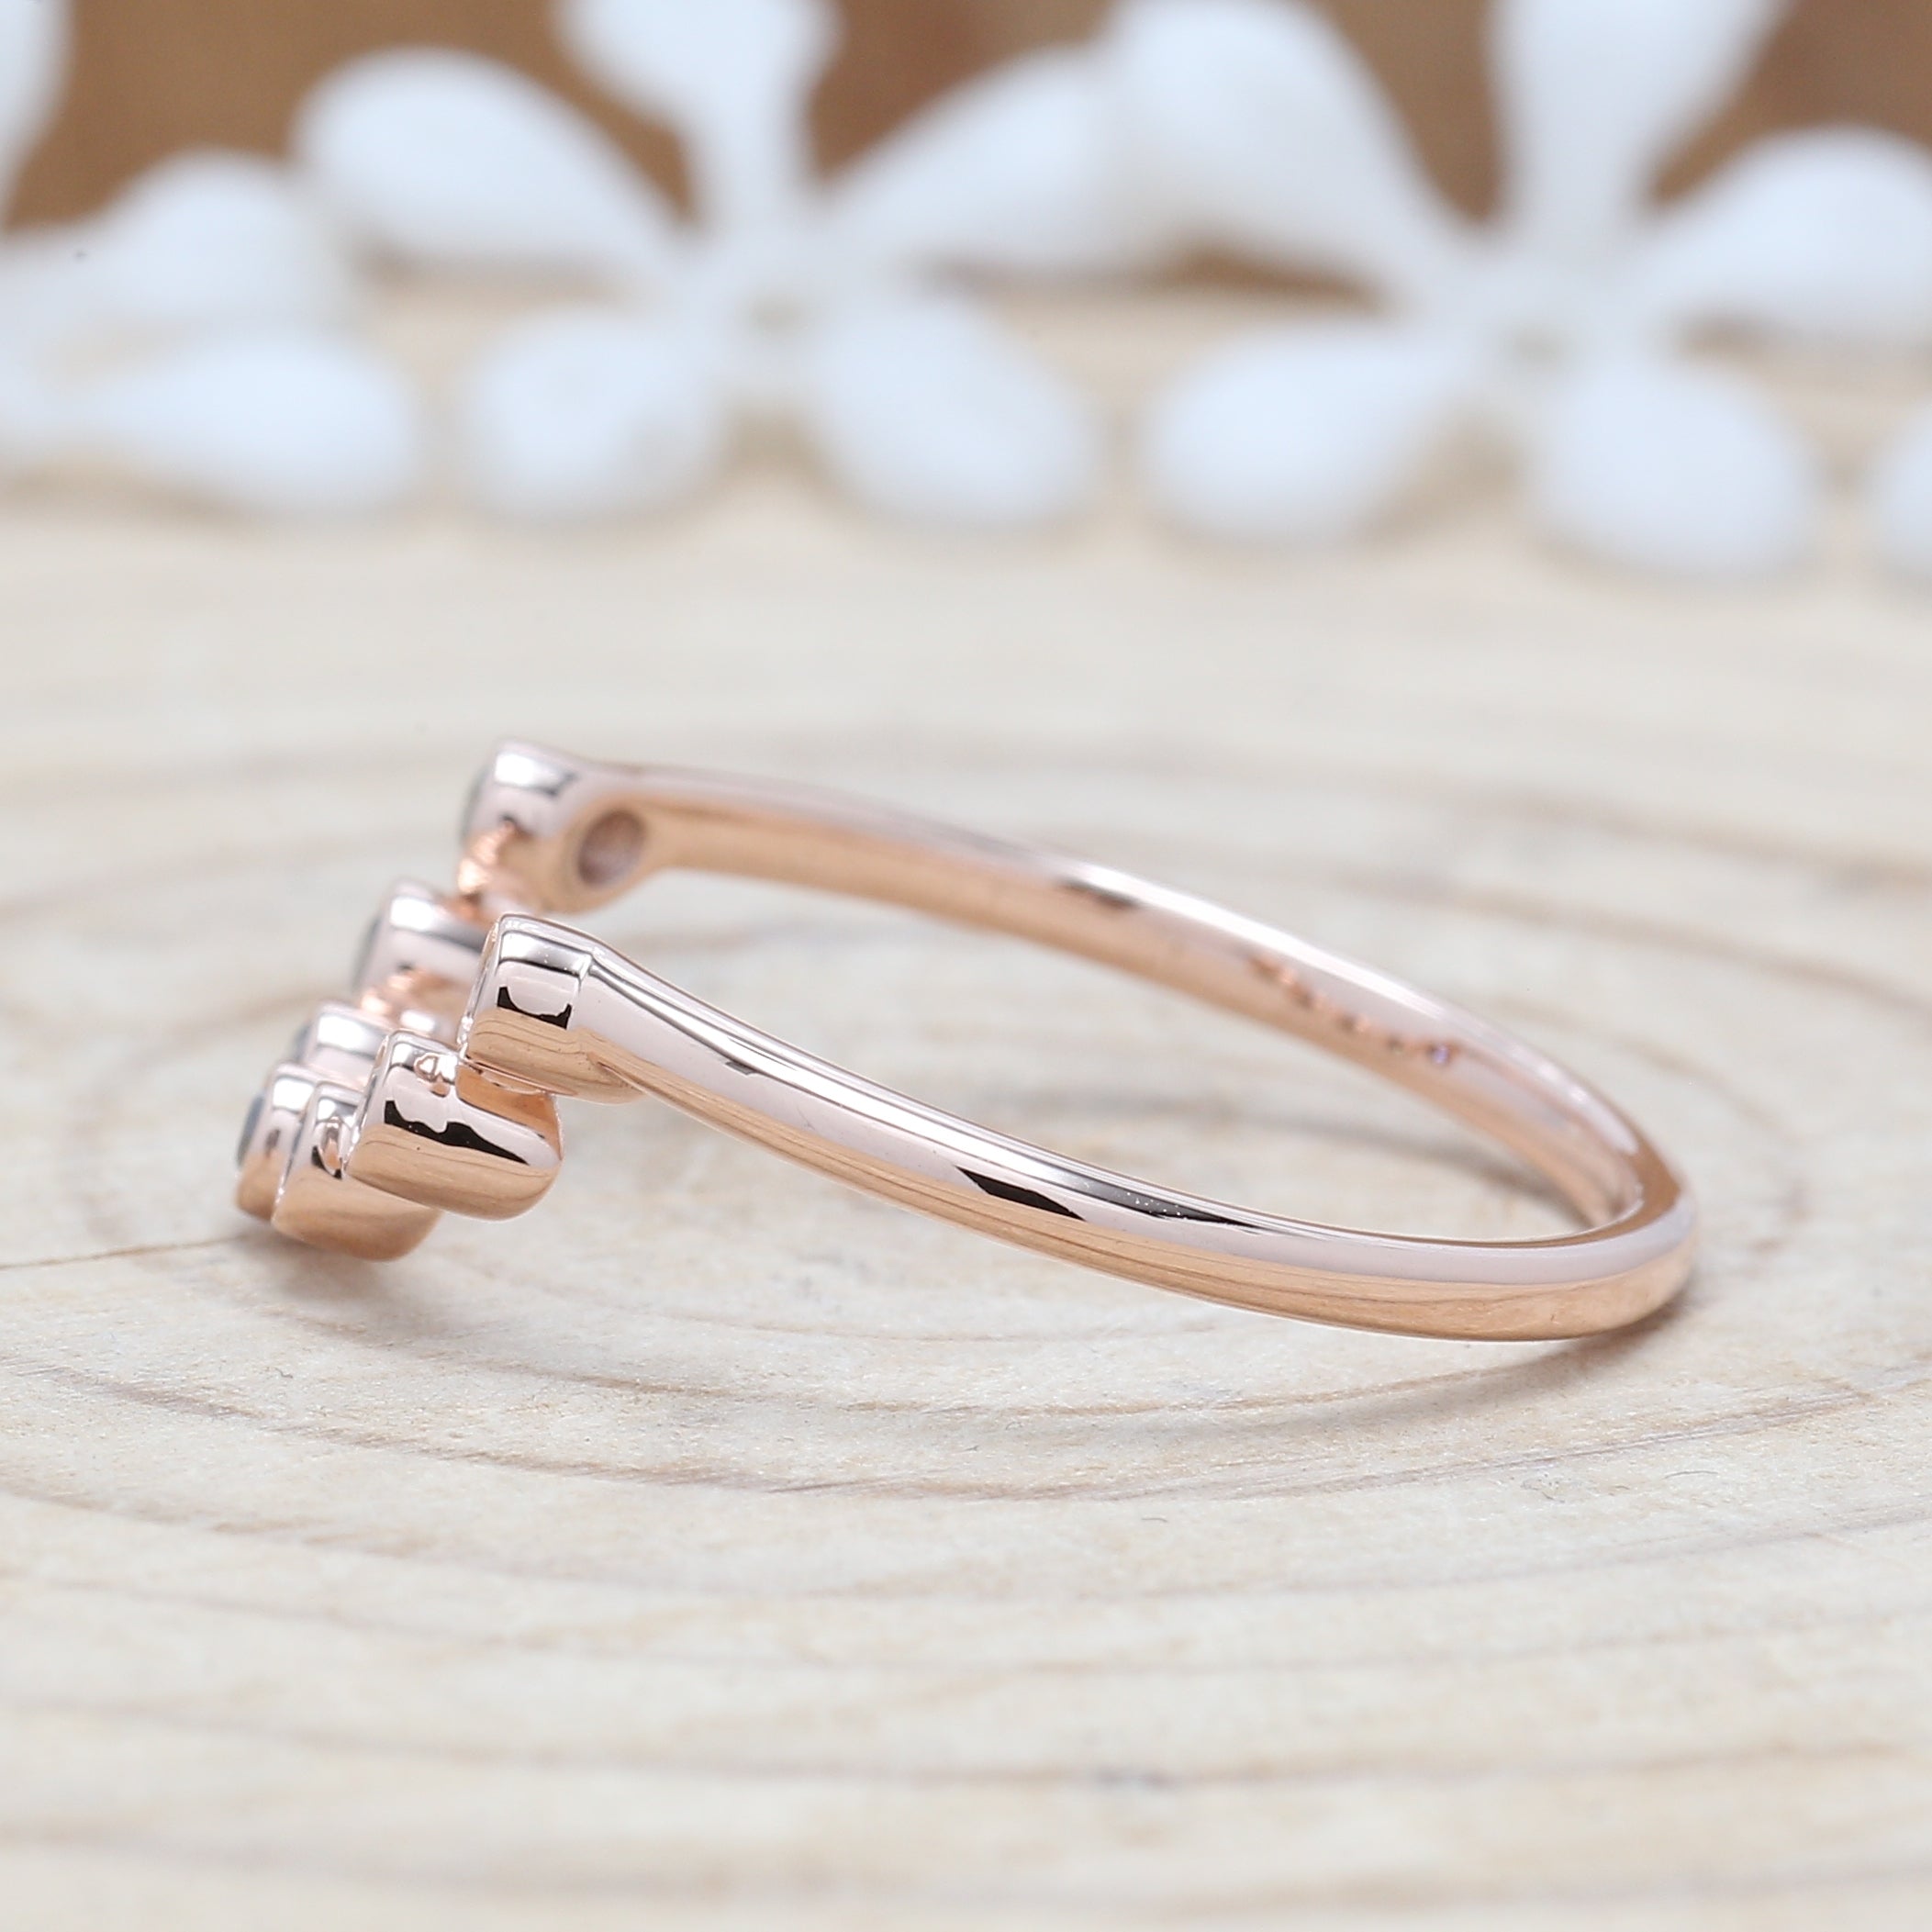 0.11 CT Salt And Pepper Diamond Band, Round Cut Diamond Band, Engagement Band, 14K Rose Gold Band, Wedding Band, Gift For Her KD925